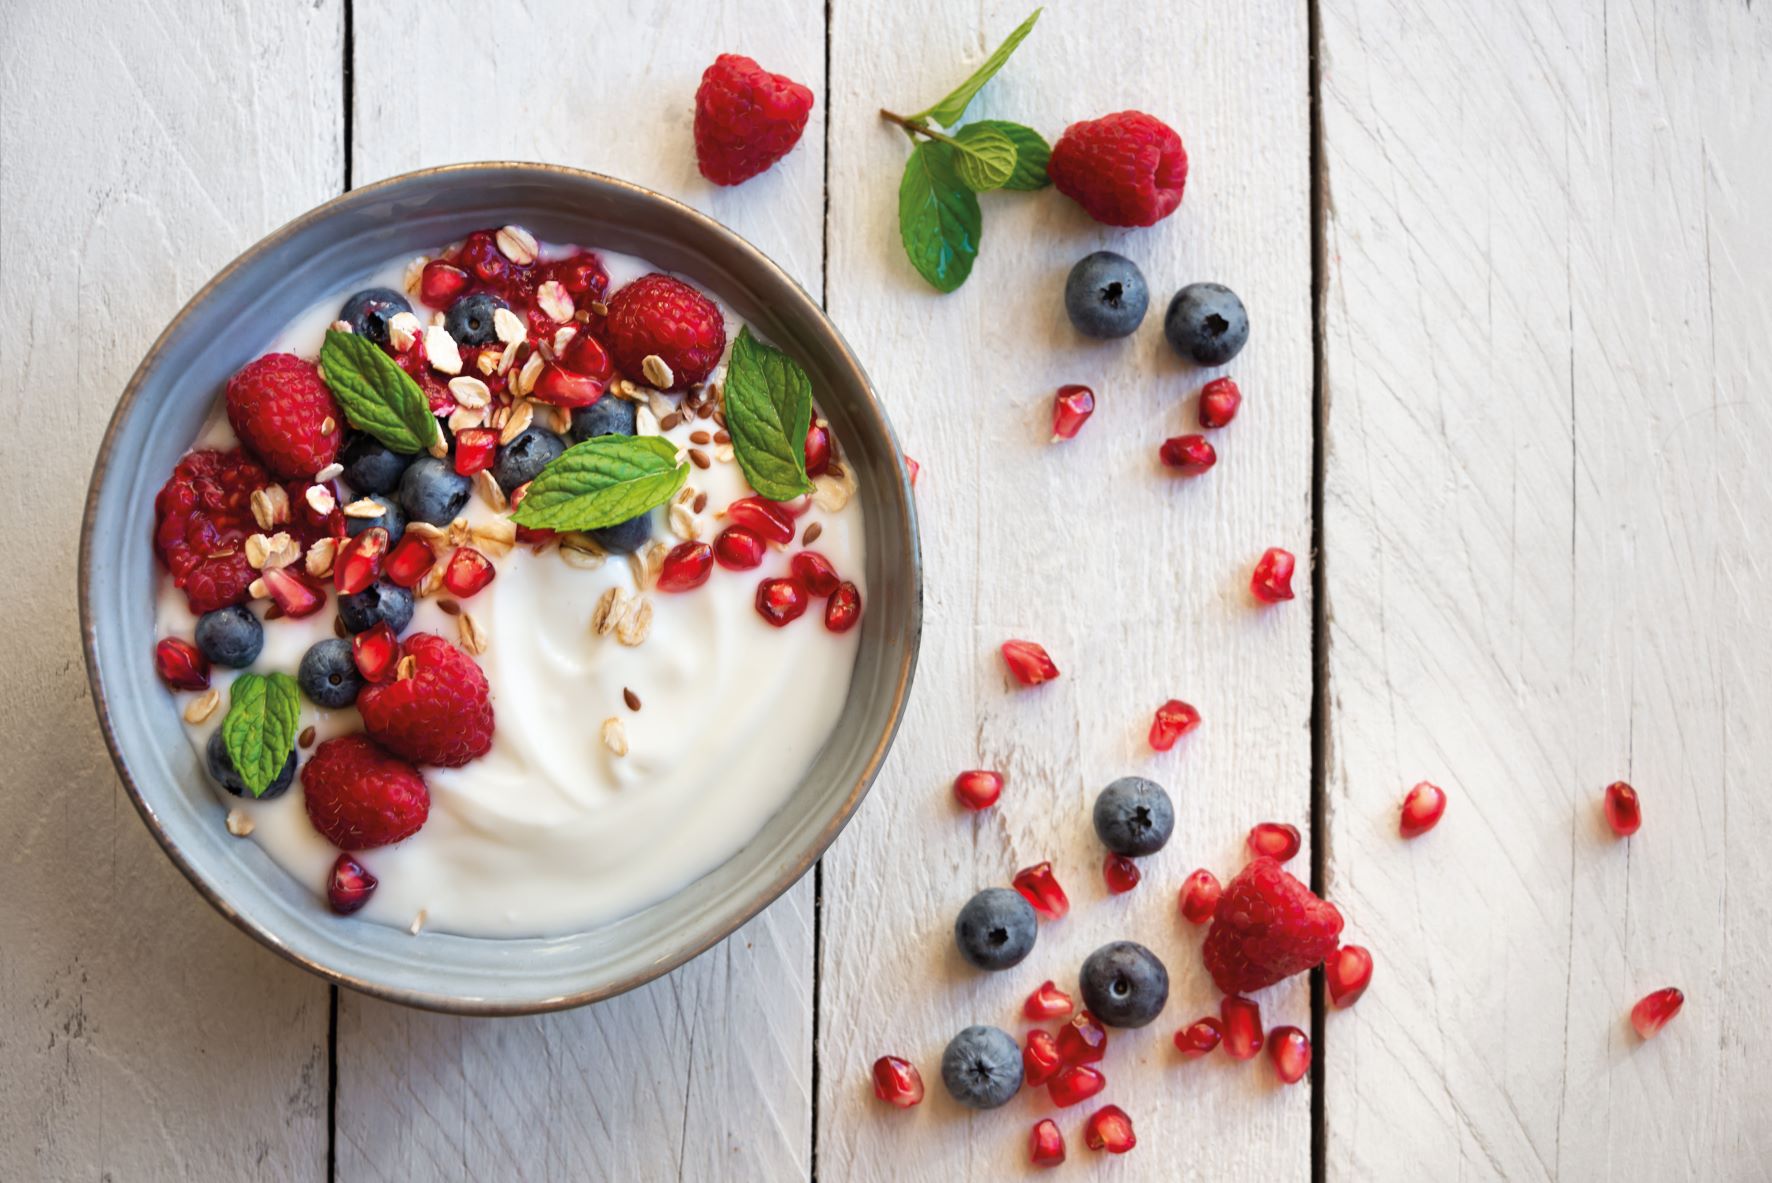 yoghurt and fruit healthy eating 21 day meal plan